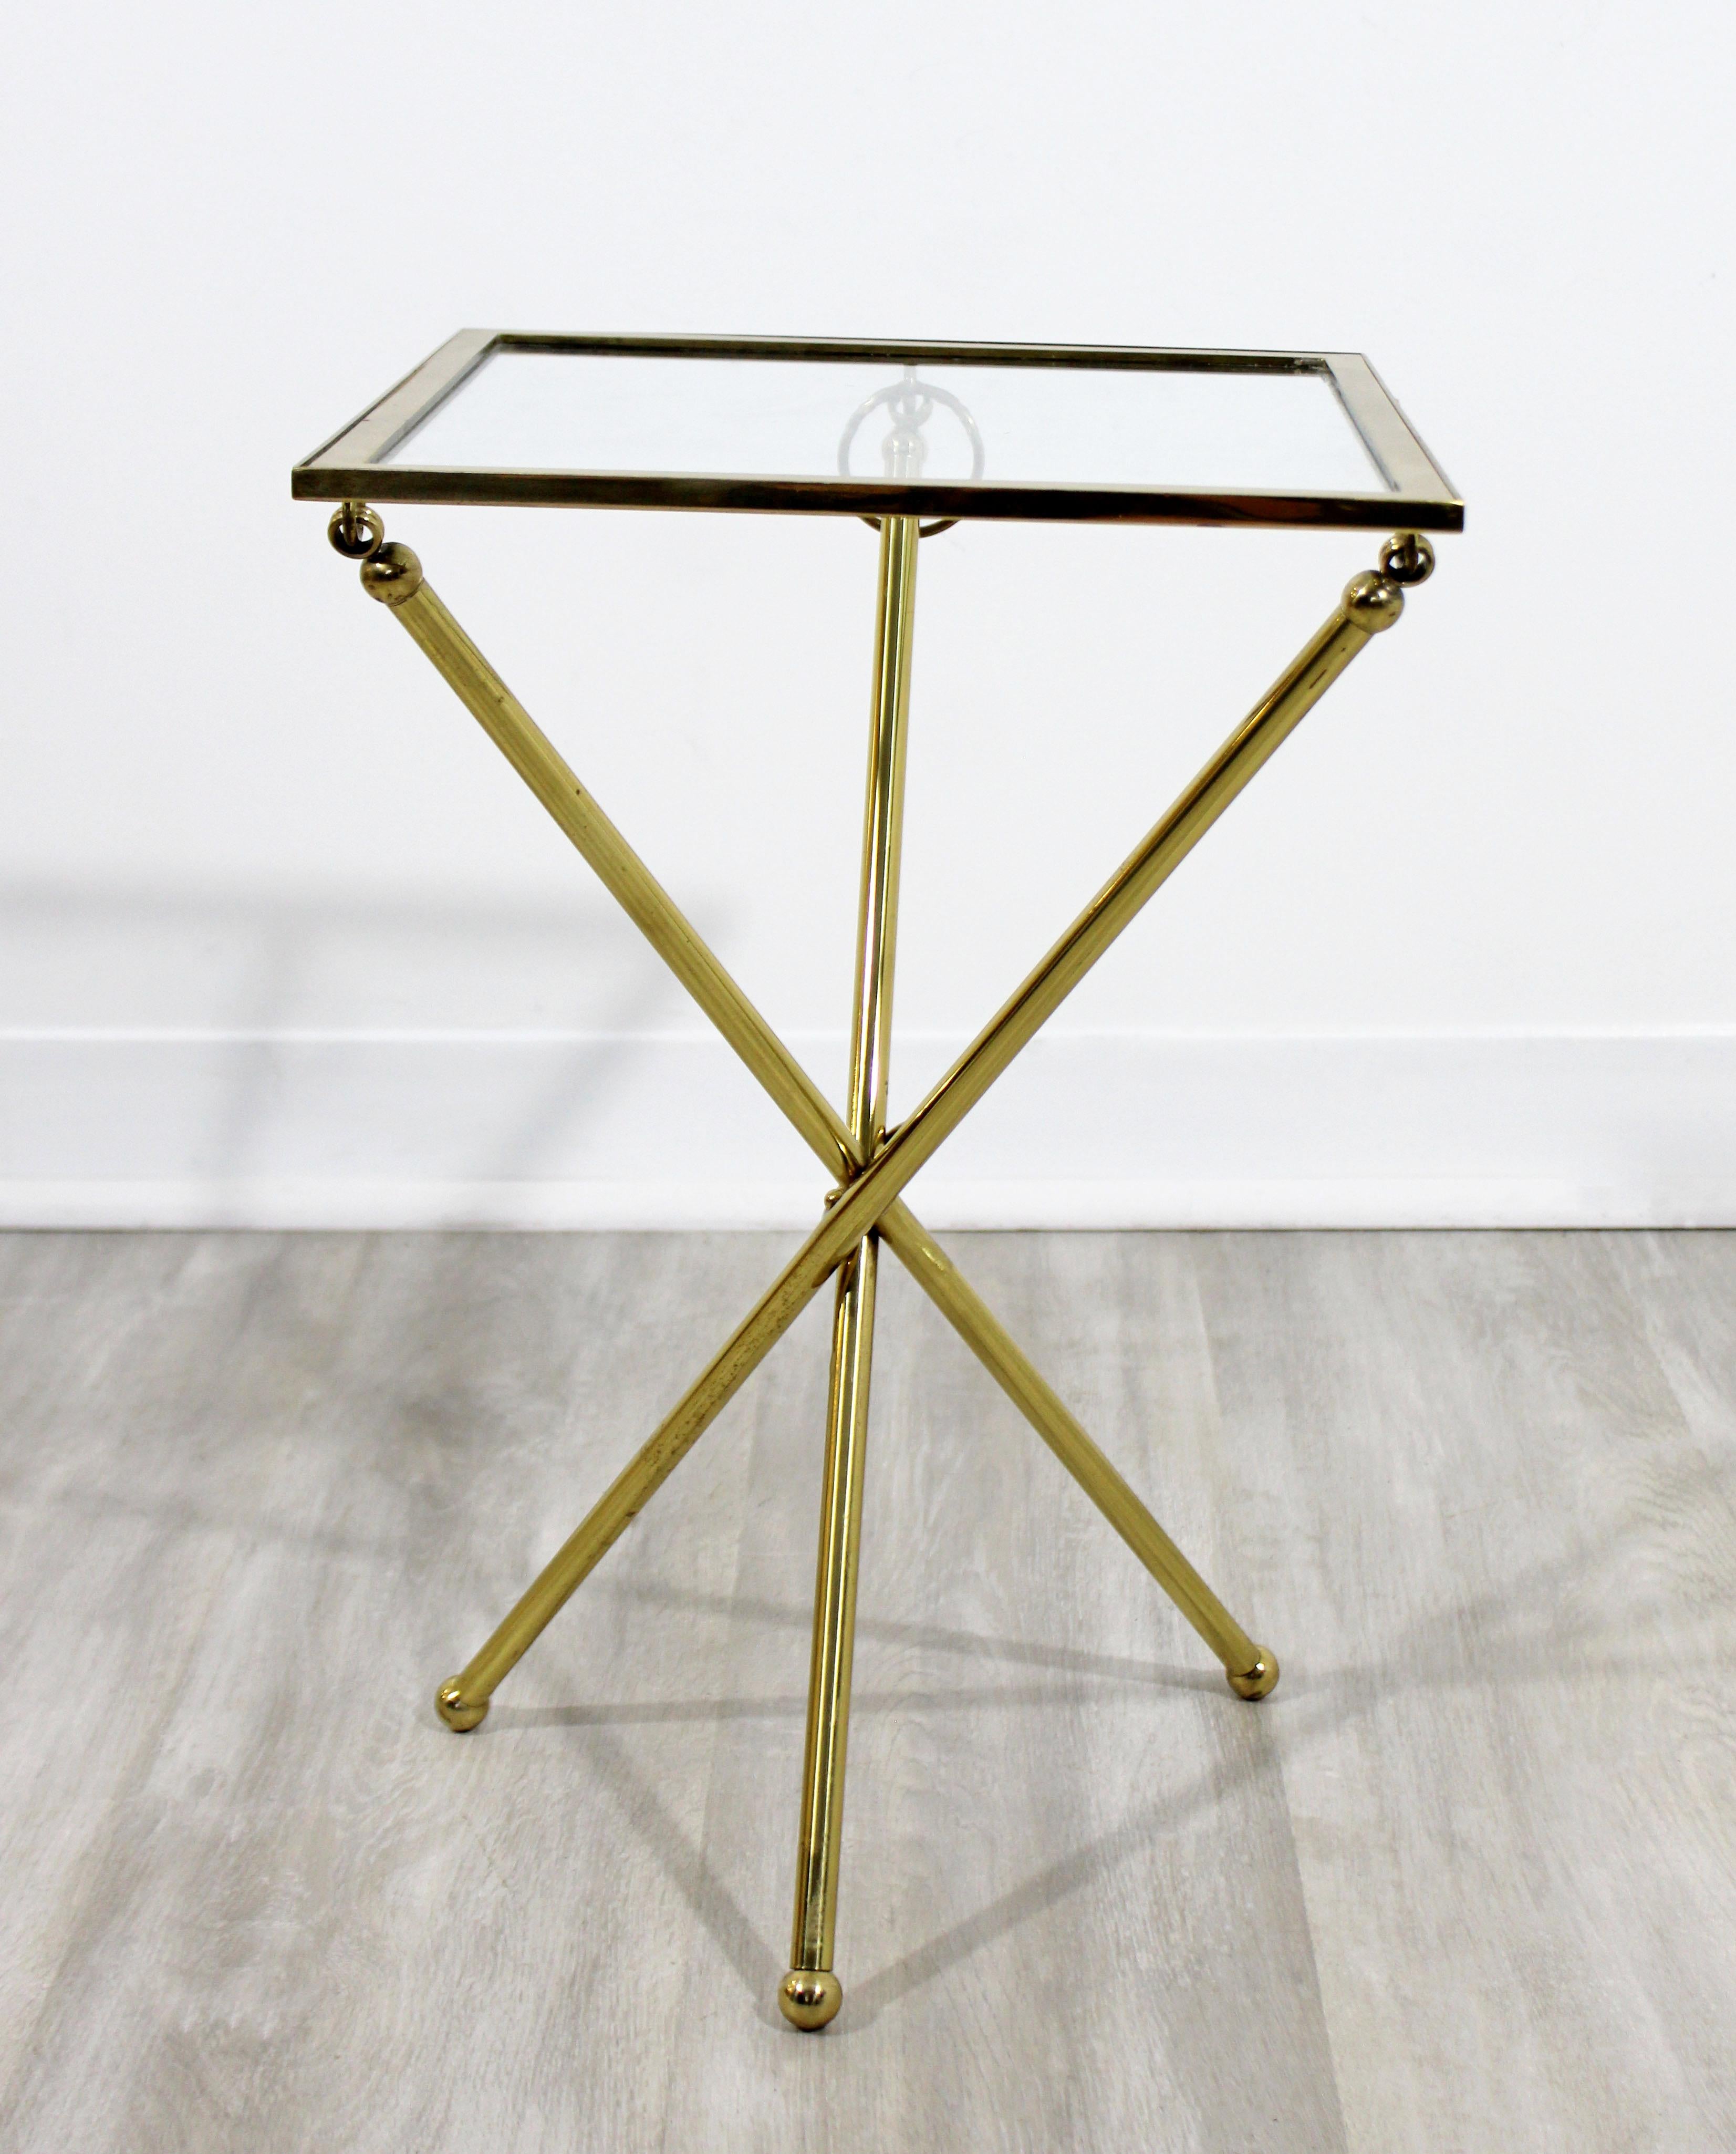 For your consideration is a gorgeous, small side or end table, made of brass and with glass top, with folding capabilities for storage, circa 1950s. In very good vintage condition. The dimensions are 12